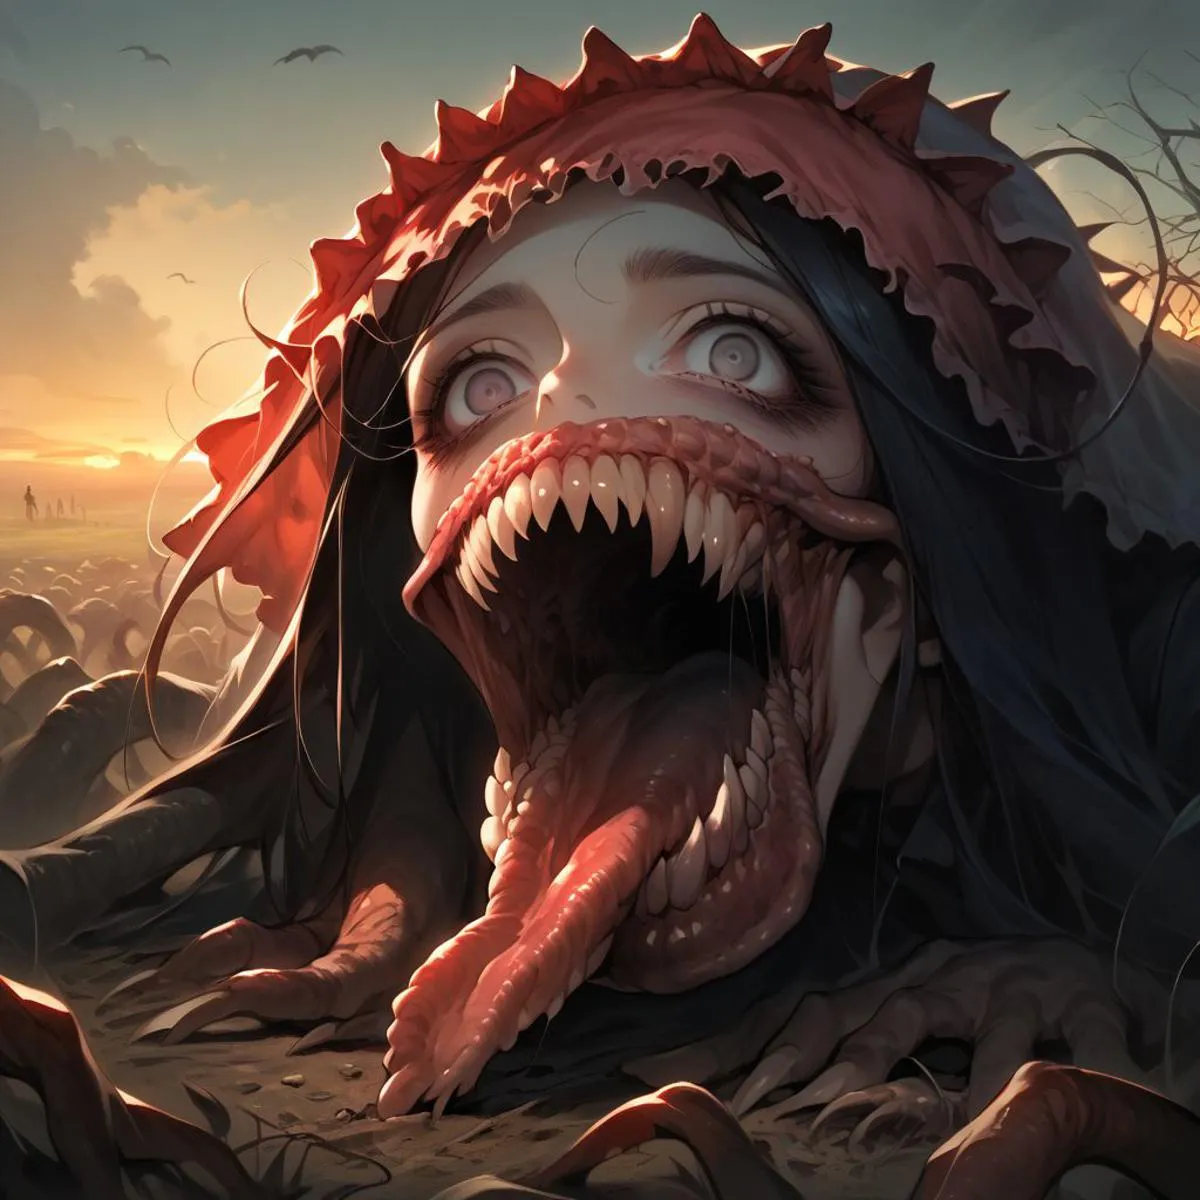 A terrifying horror creature with a monstrous mouth, long tongue, and sharp teeth emerging under a sunset sky. AI generated image using Stable Diffusion.